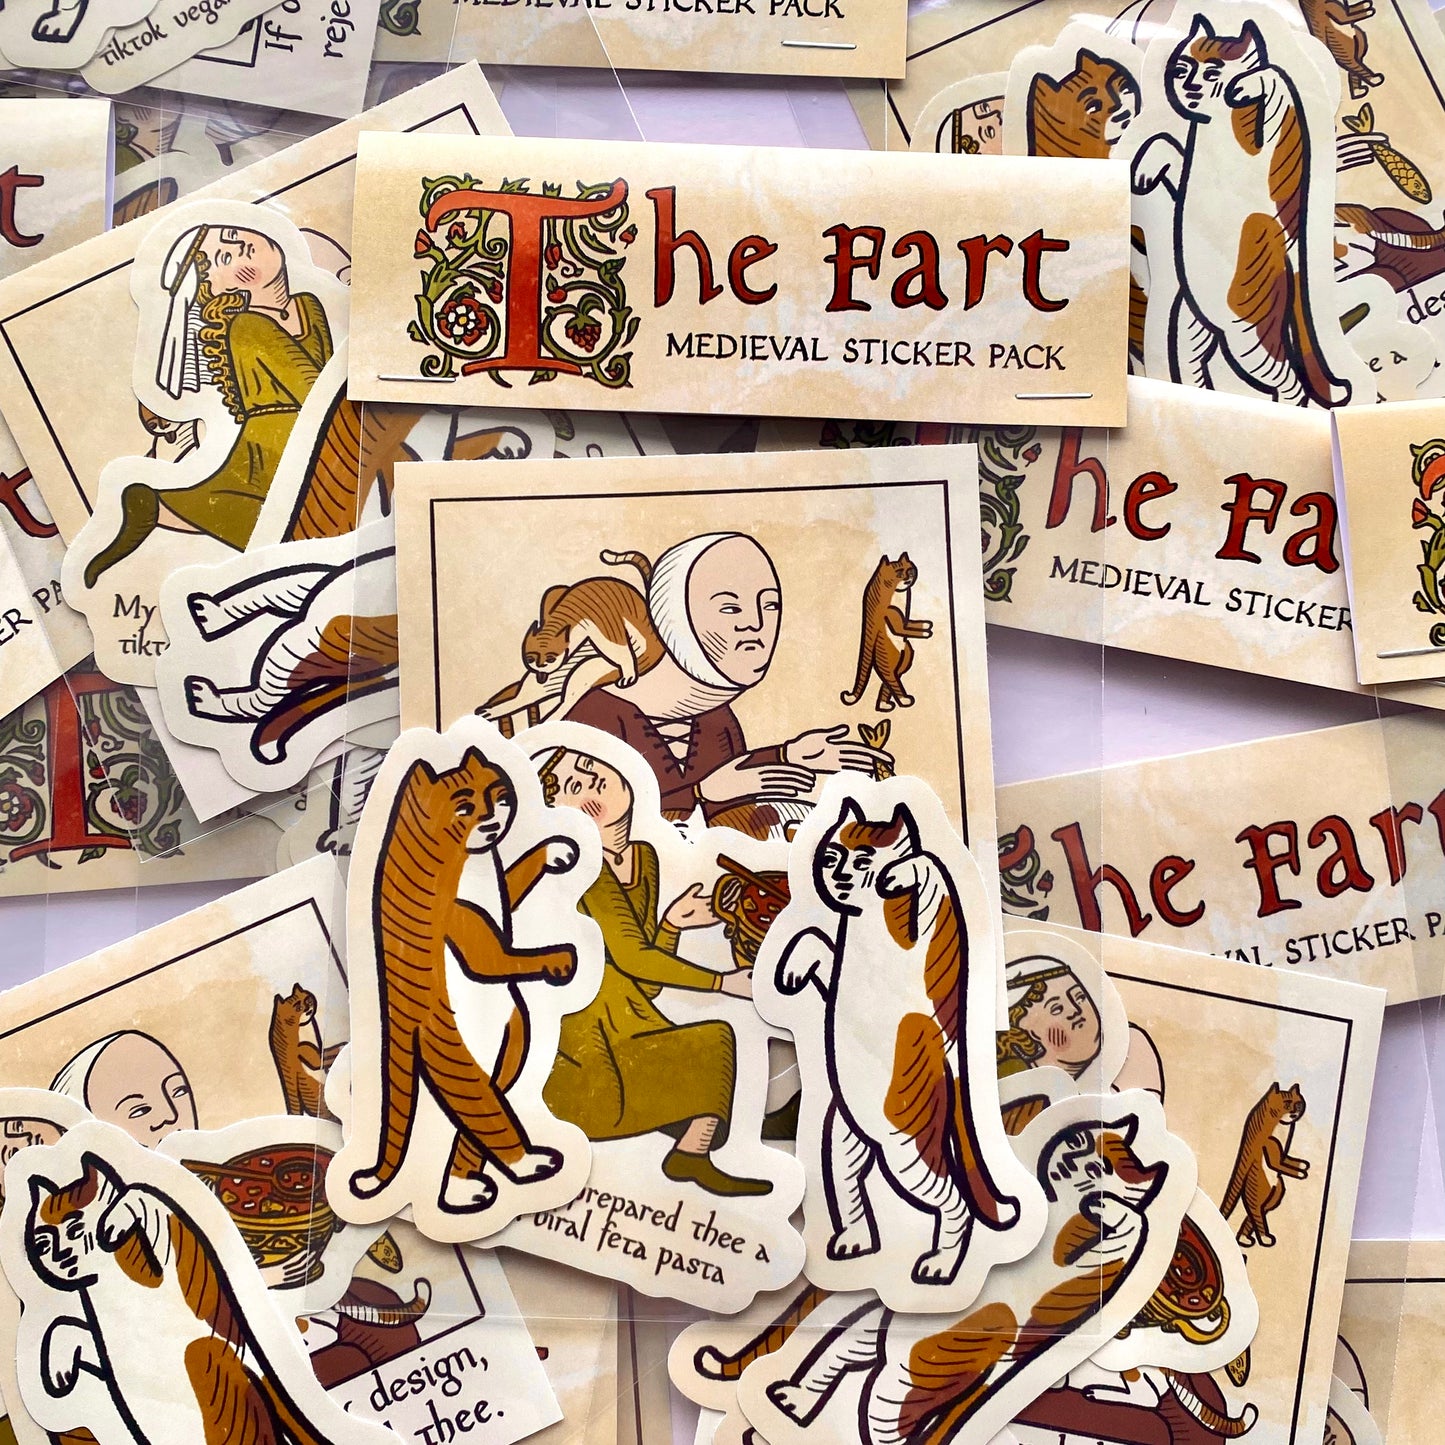 The Fart Medieval Sticker Pack